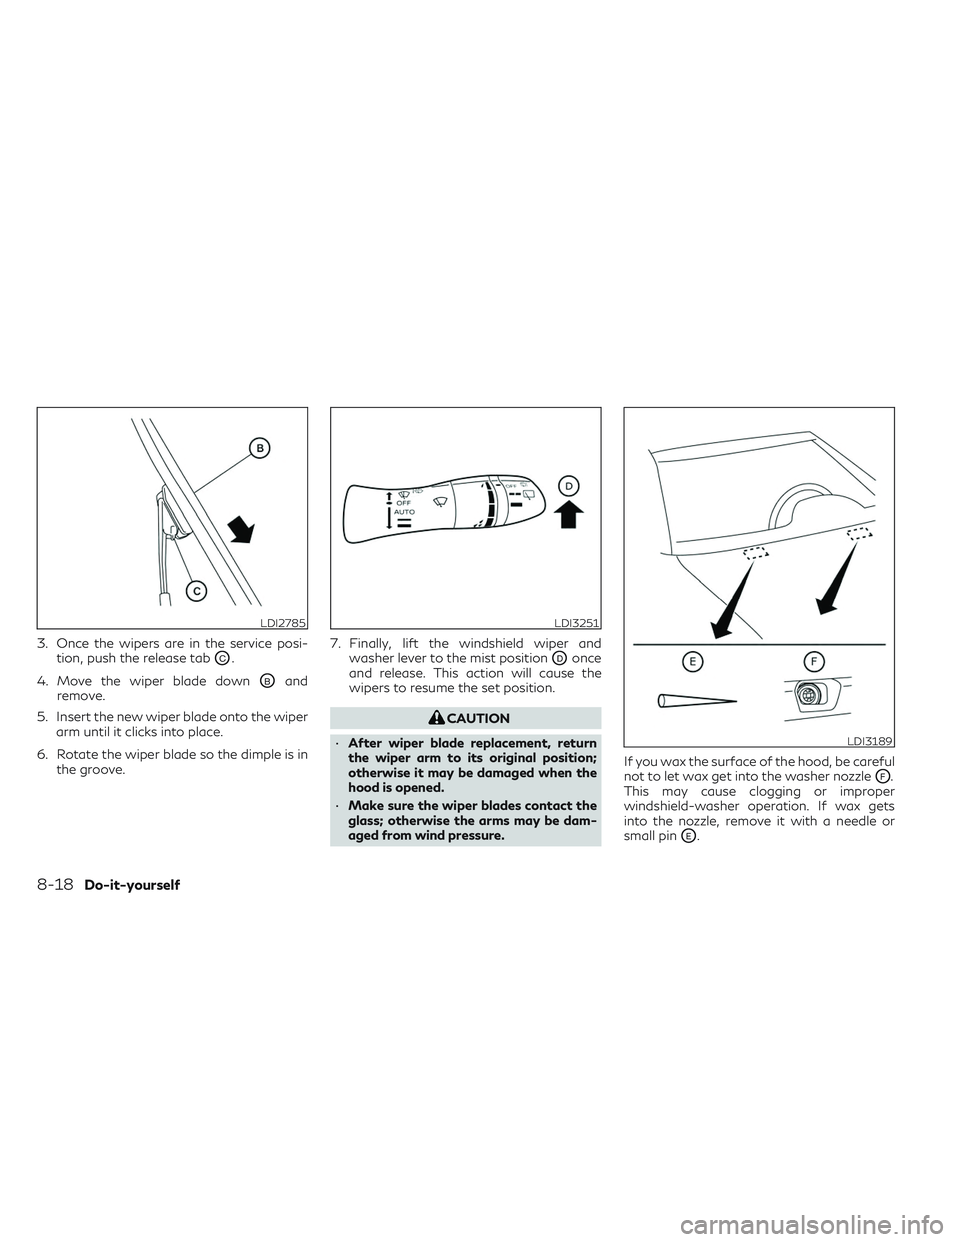 INFINITI QX50 2022  Owners Manual 3. Once the wipers are in the service posi-tion, push the release tab
OC.
4. Move the wiper blade down
OBand
remove.
5. Insert the new wiper blade onto the wiper arm until it clicks into place.
6. Rot